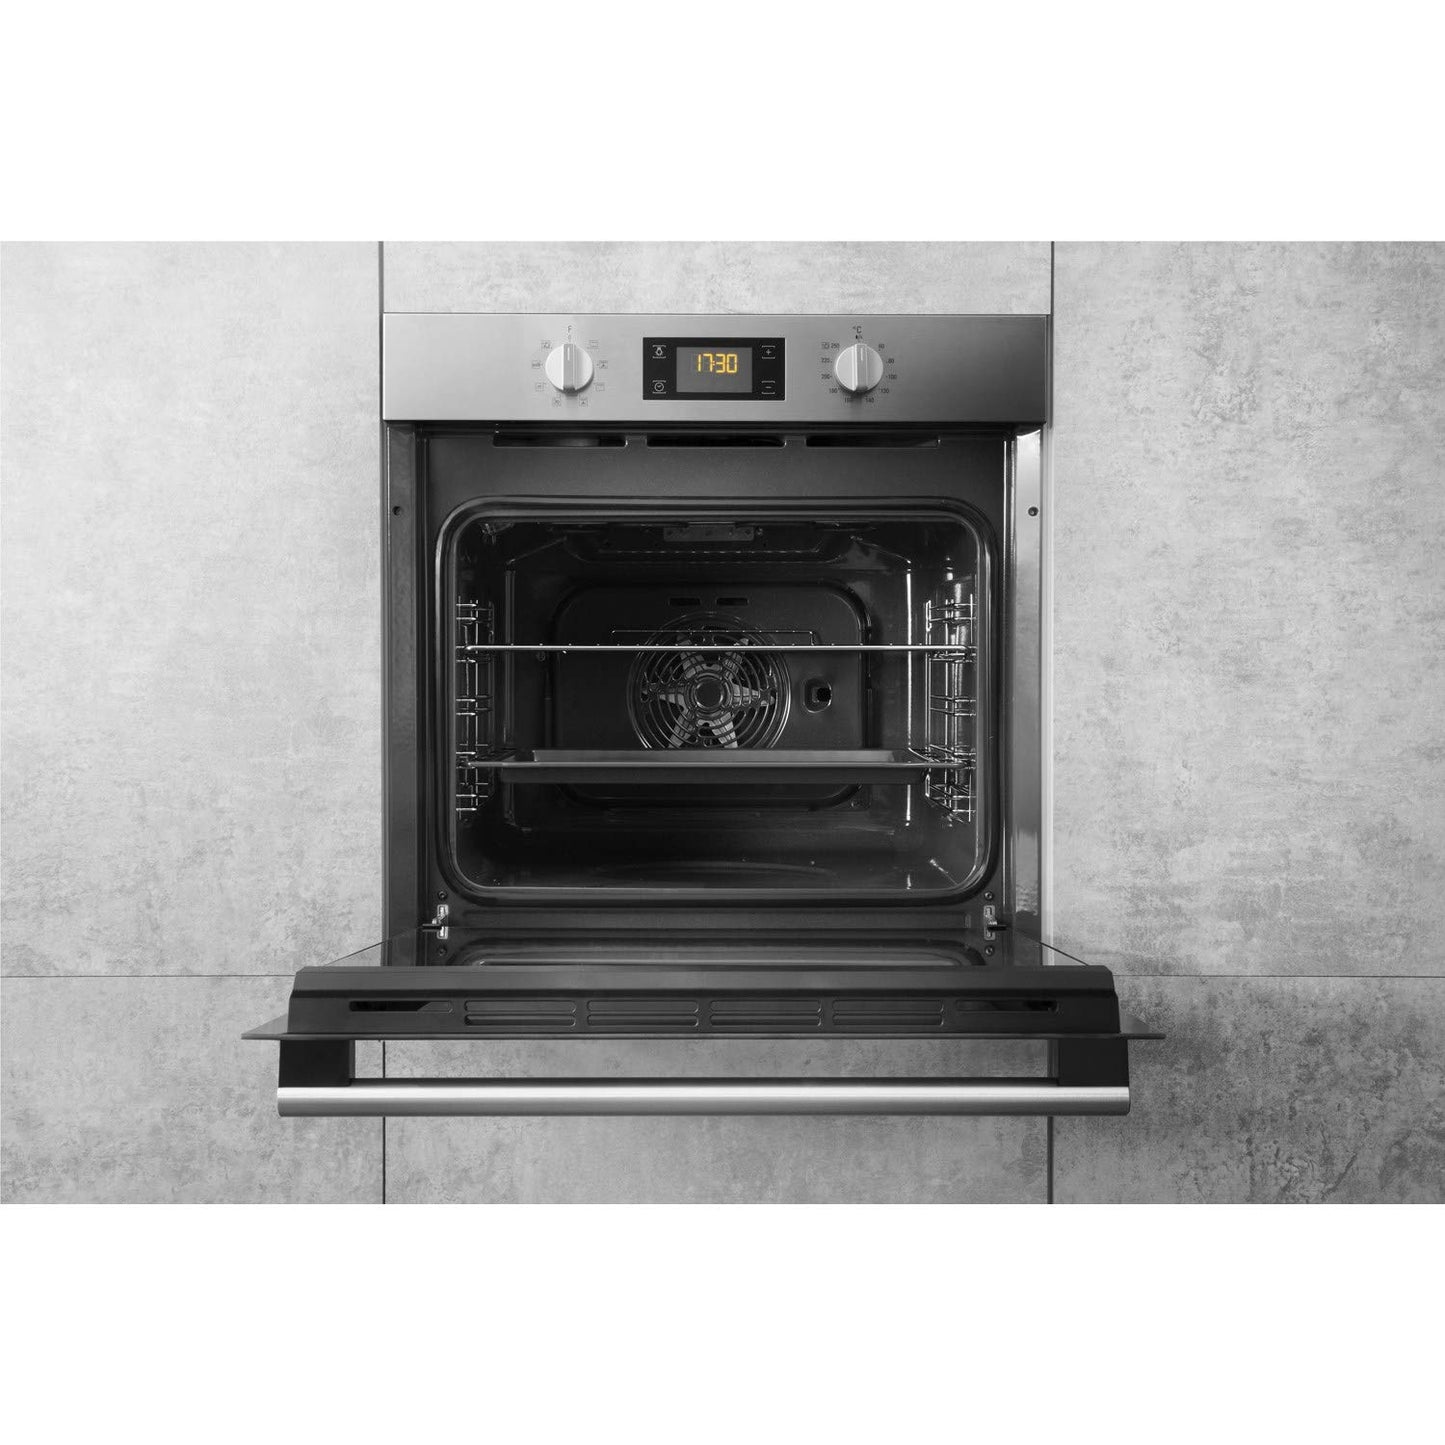 HOTPOINT SA4544CIX 8 Function Electric Built-in Single Oven - Stainless Steel